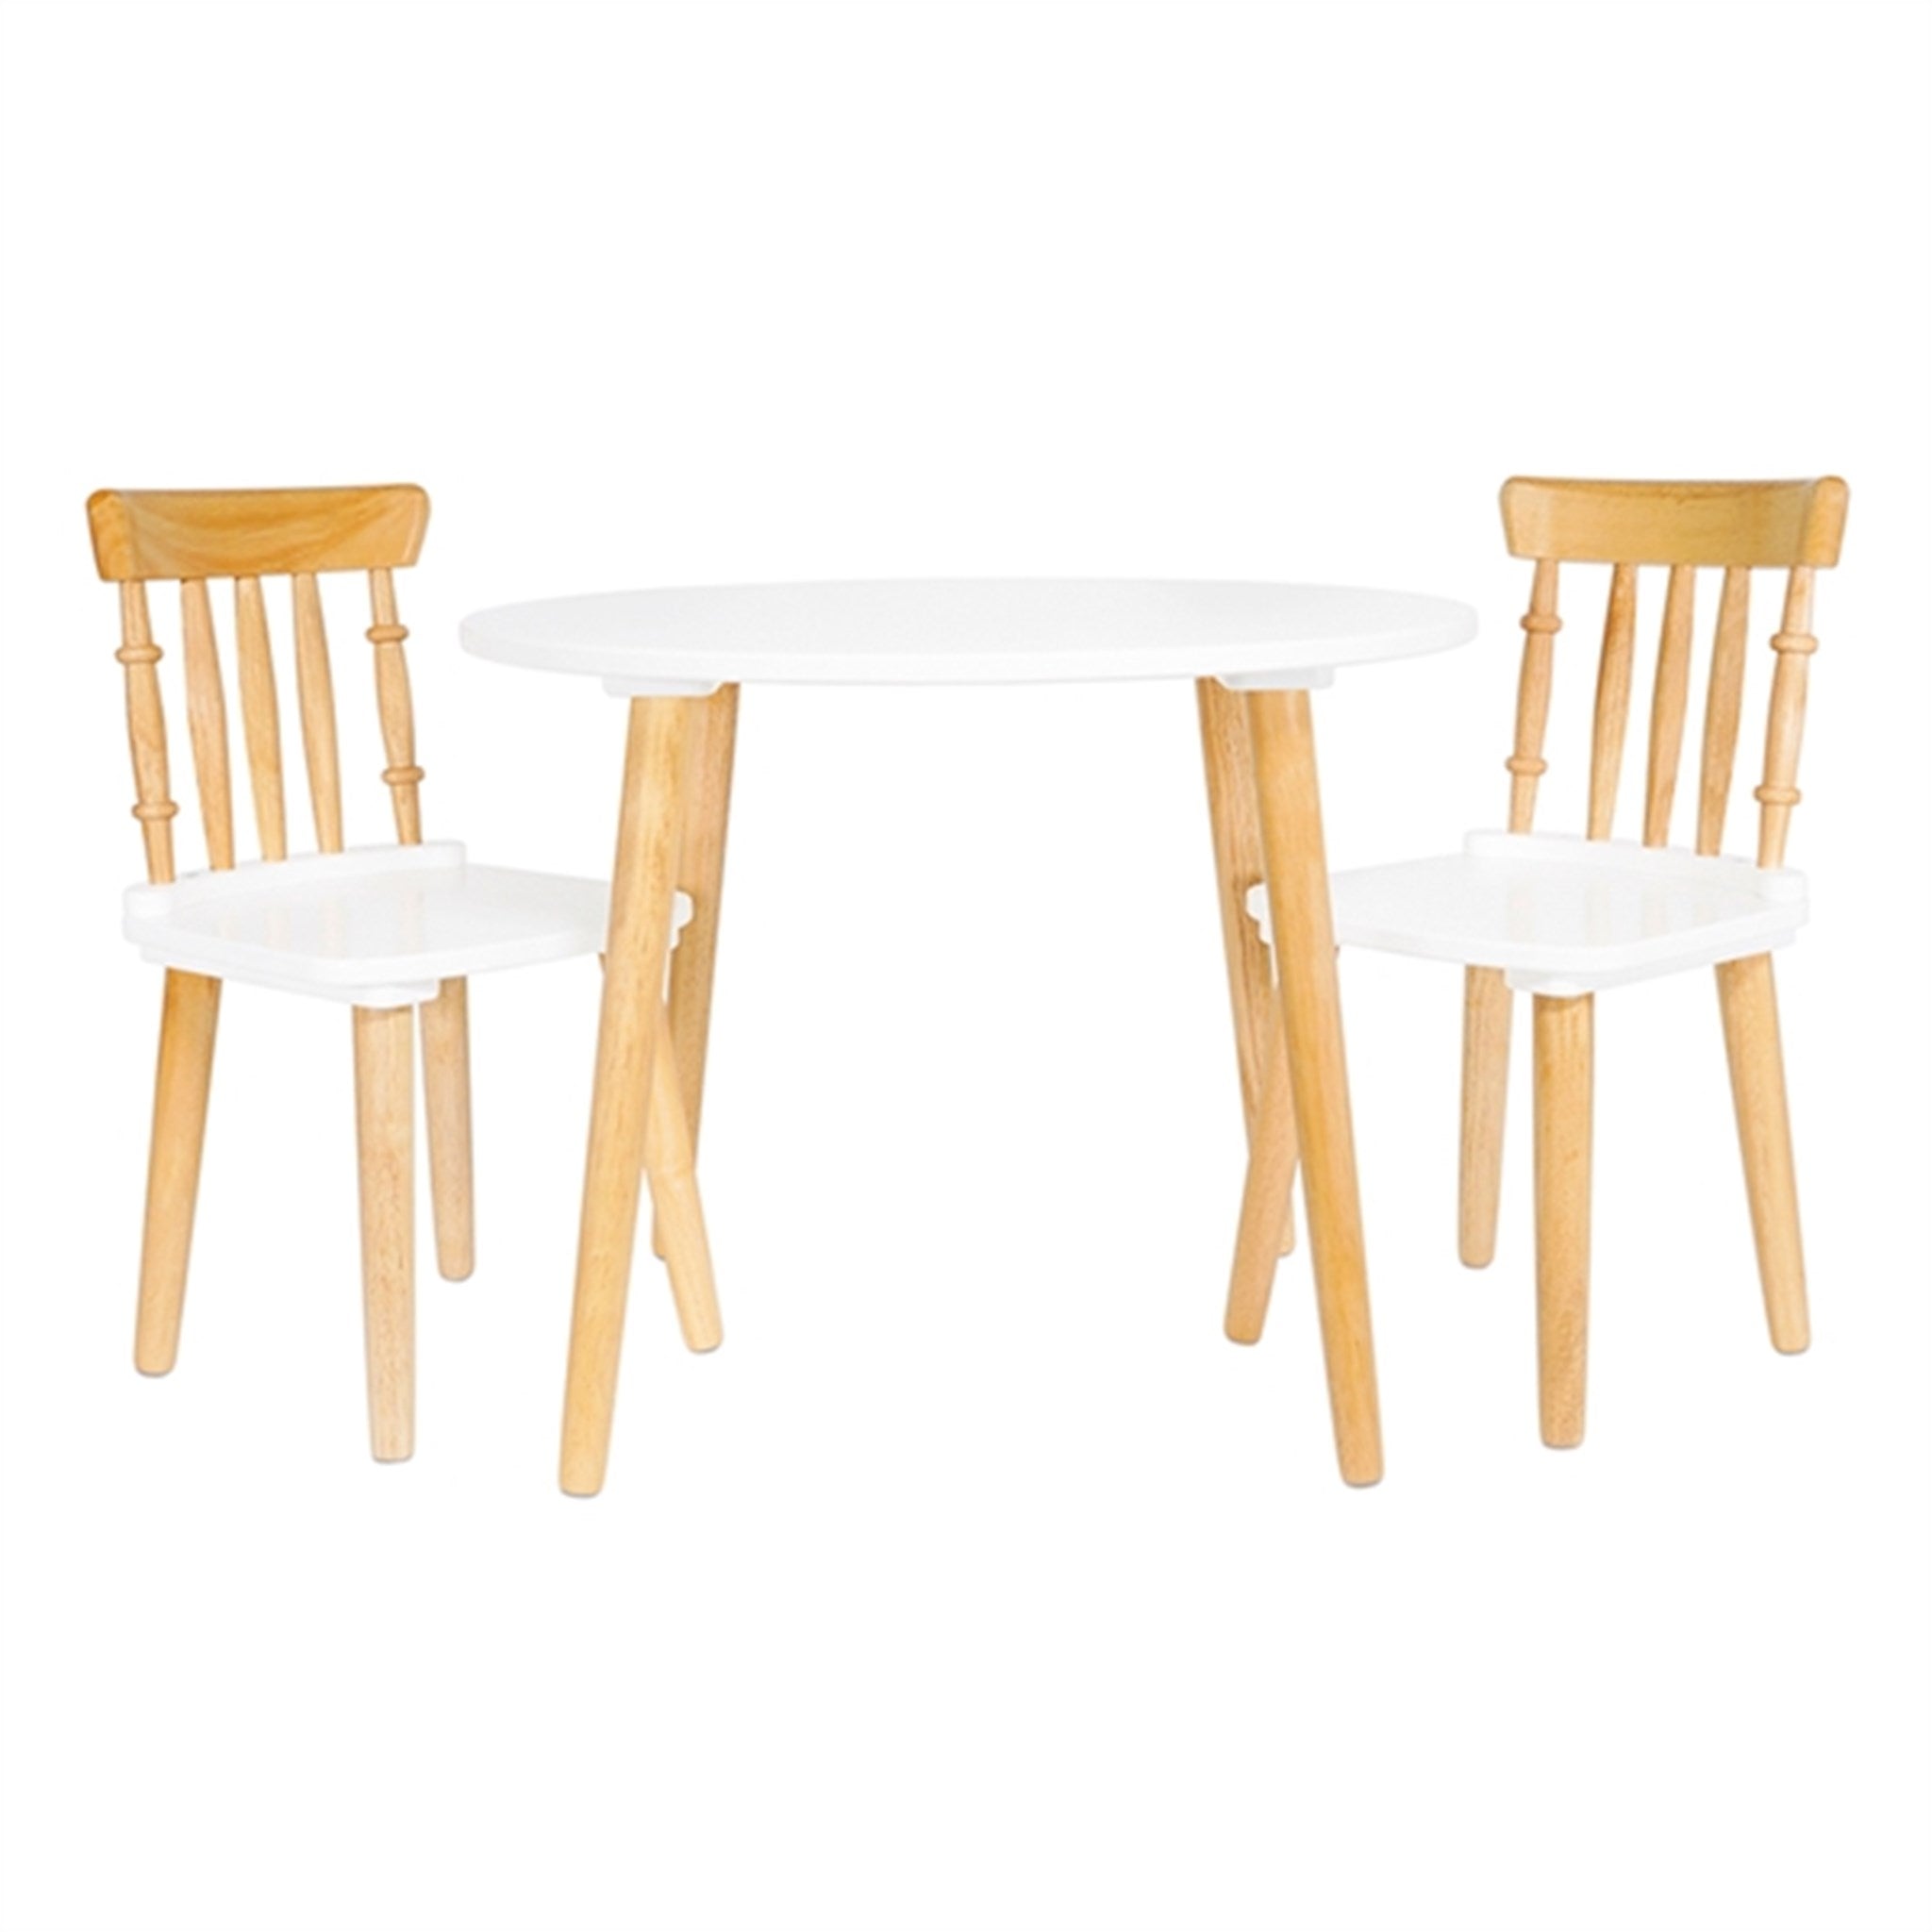 Le Toy Van Honeybake Table With 2 Chairs 3